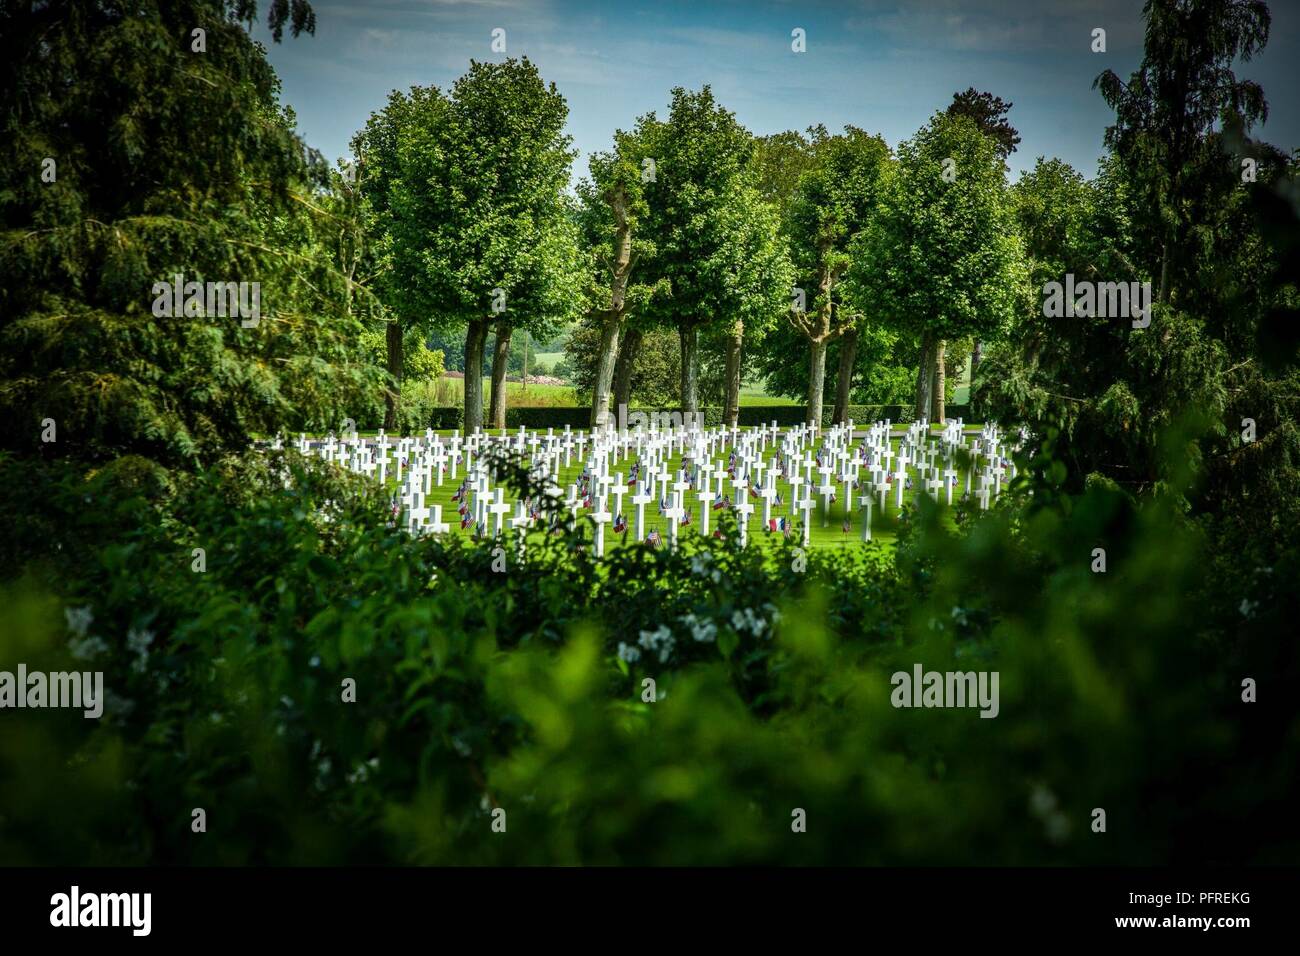 The Aisne-Marne American Cemetery during a ceremony commemorating the 100th anniversary of the Battle of Belleau Wood in Belleau, France, May 27, 2018. The event, which took place over Memorial Day weekend, commemorated service members who gave their lives in defense of the nation and paid homage to their ultimate sacrifice. Stock Photo